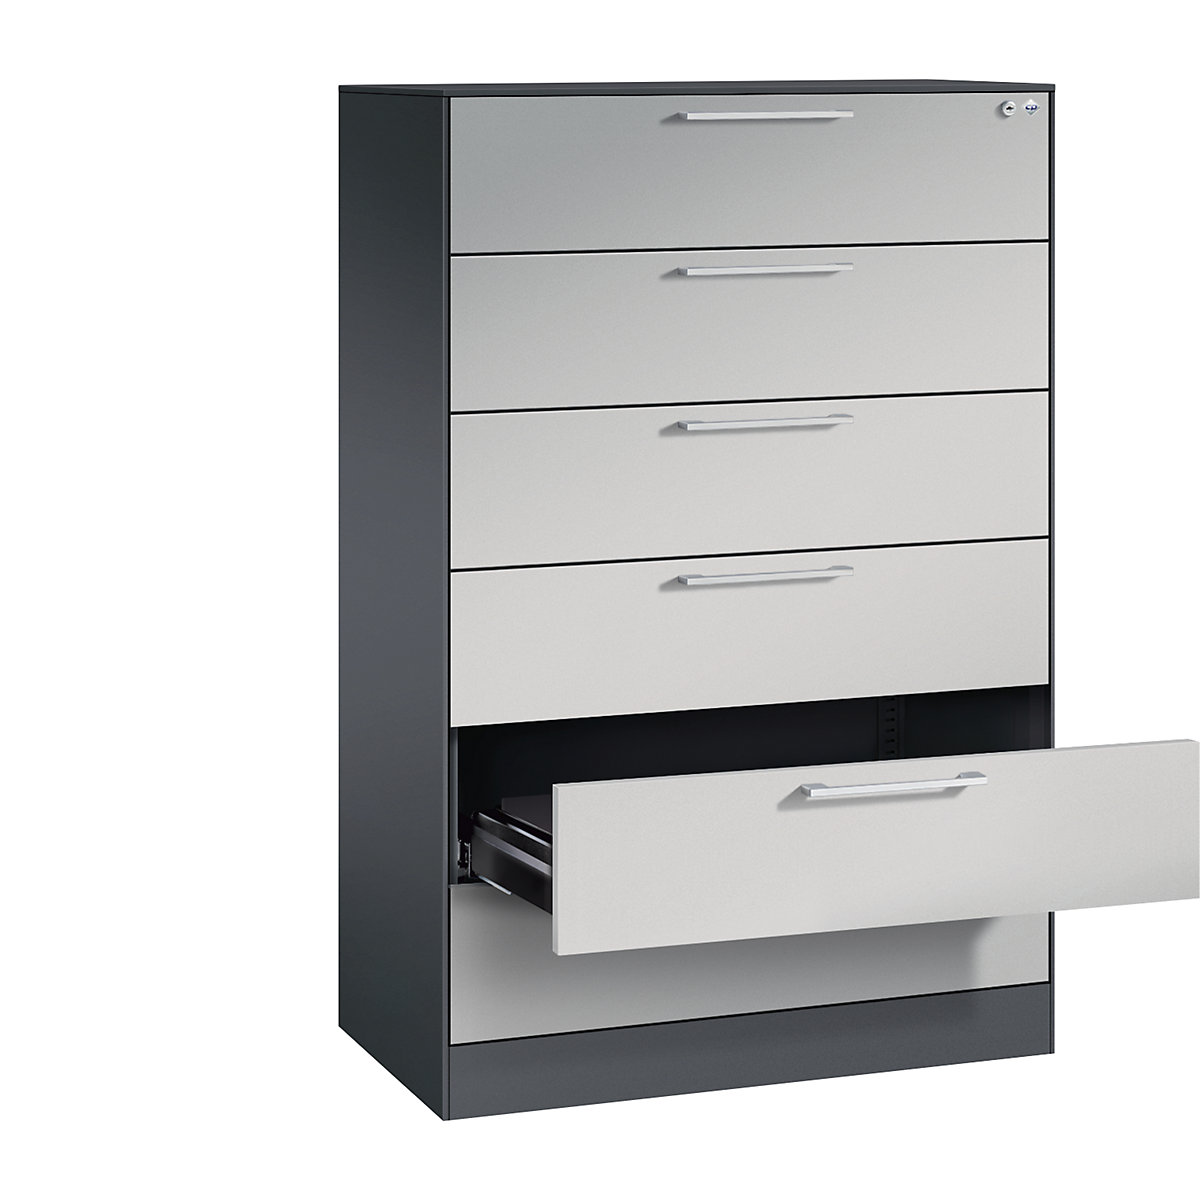 ASISTO card file cabinet – C+P, height 1292 mm, with 6 drawers, A5 landscape, black grey/white aluminium-21